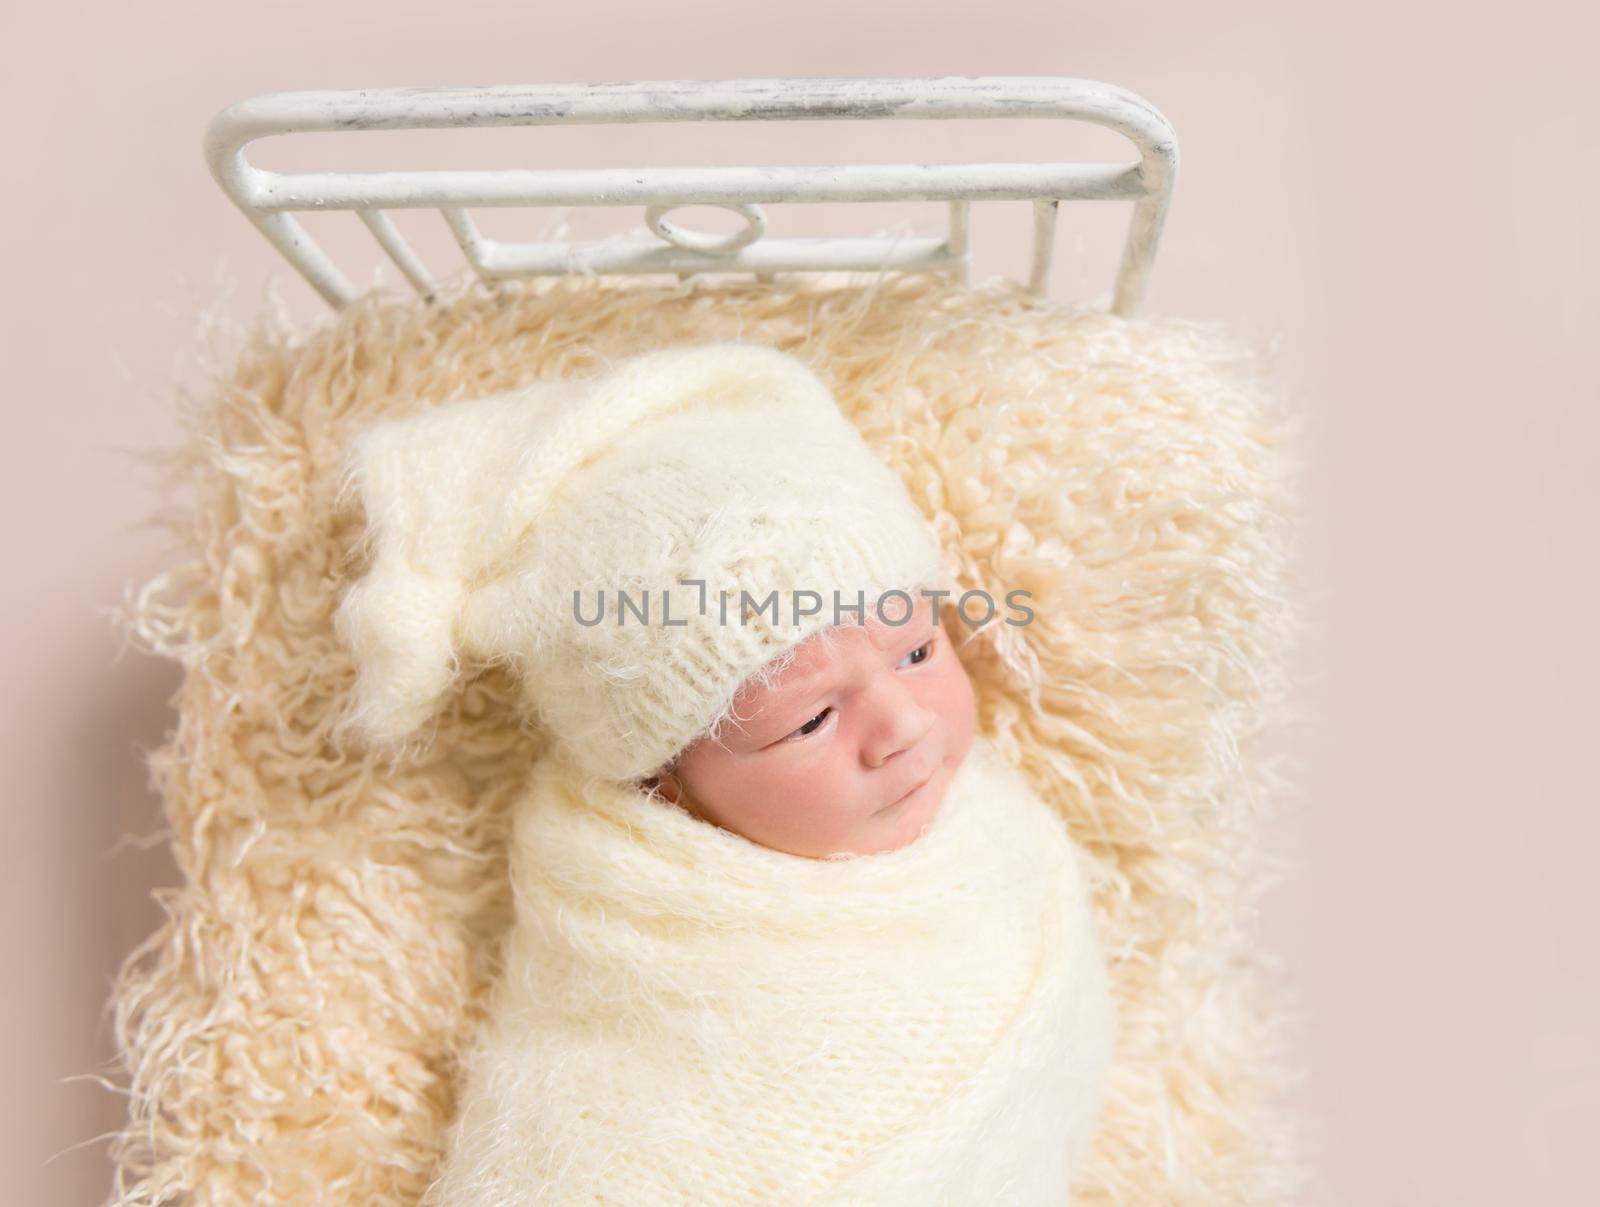 Kid resting covered with yellowish cover sheet by tan4ikk1